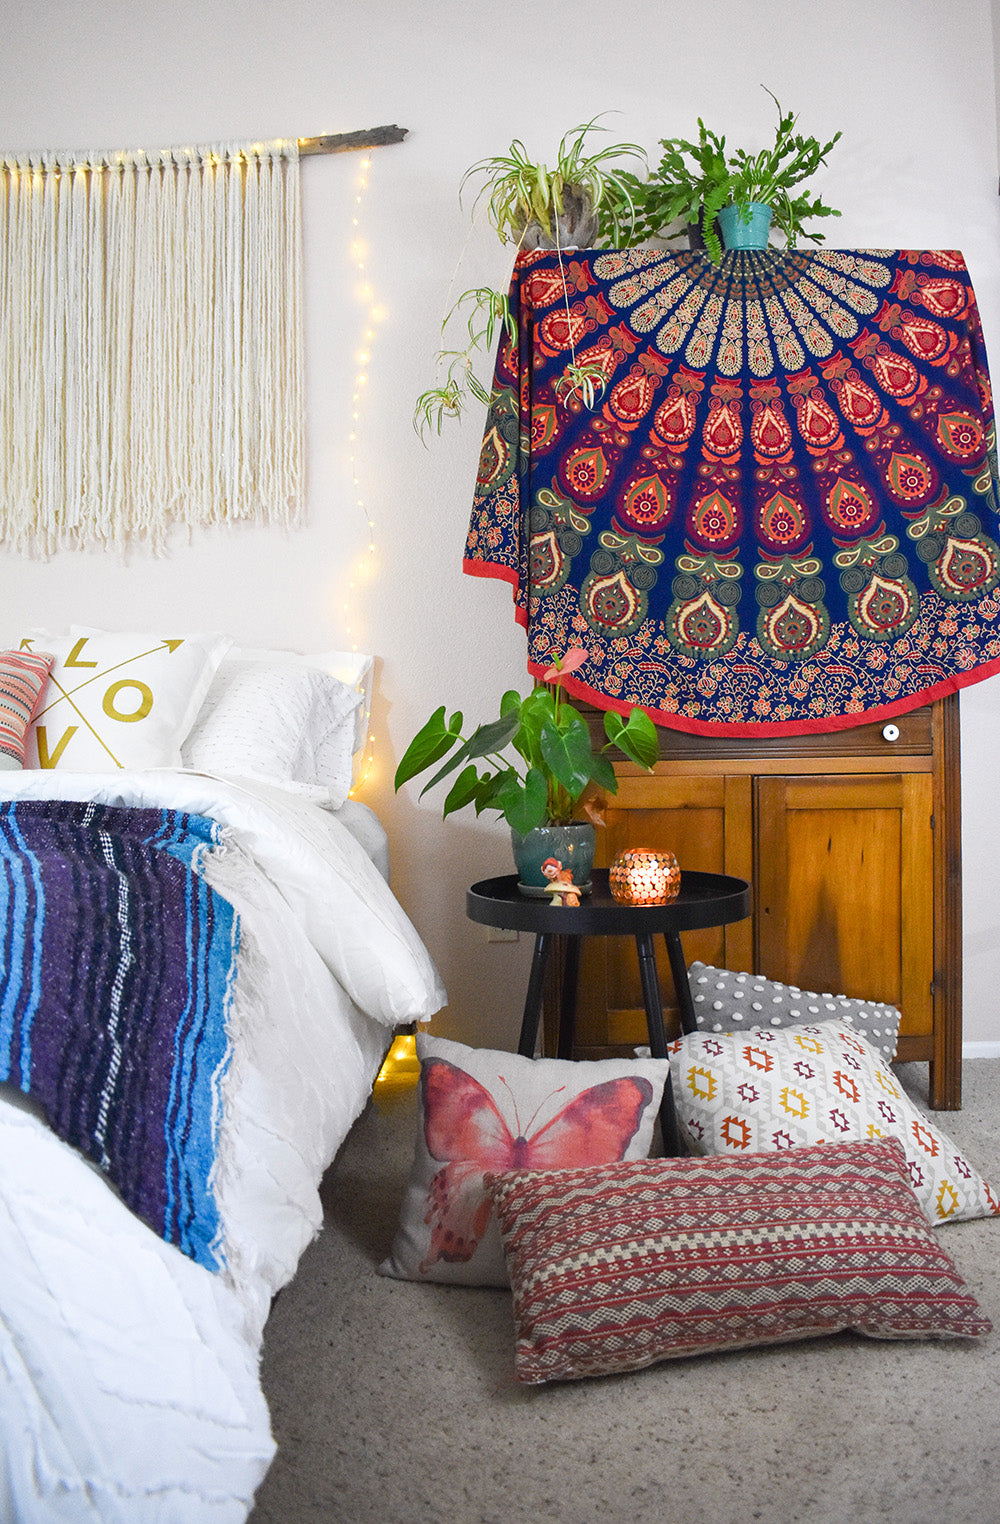 Have thrift store furniture or hand me down furniture from relatives that’s just not quite your style? Dress it up with a roundie to hide what’s underneath. An easy solution that will beautify your home while you save up to get your dream furniture.  Round tapestries also come in handy when living with roommates or in the dorm room to infuse your personal style.